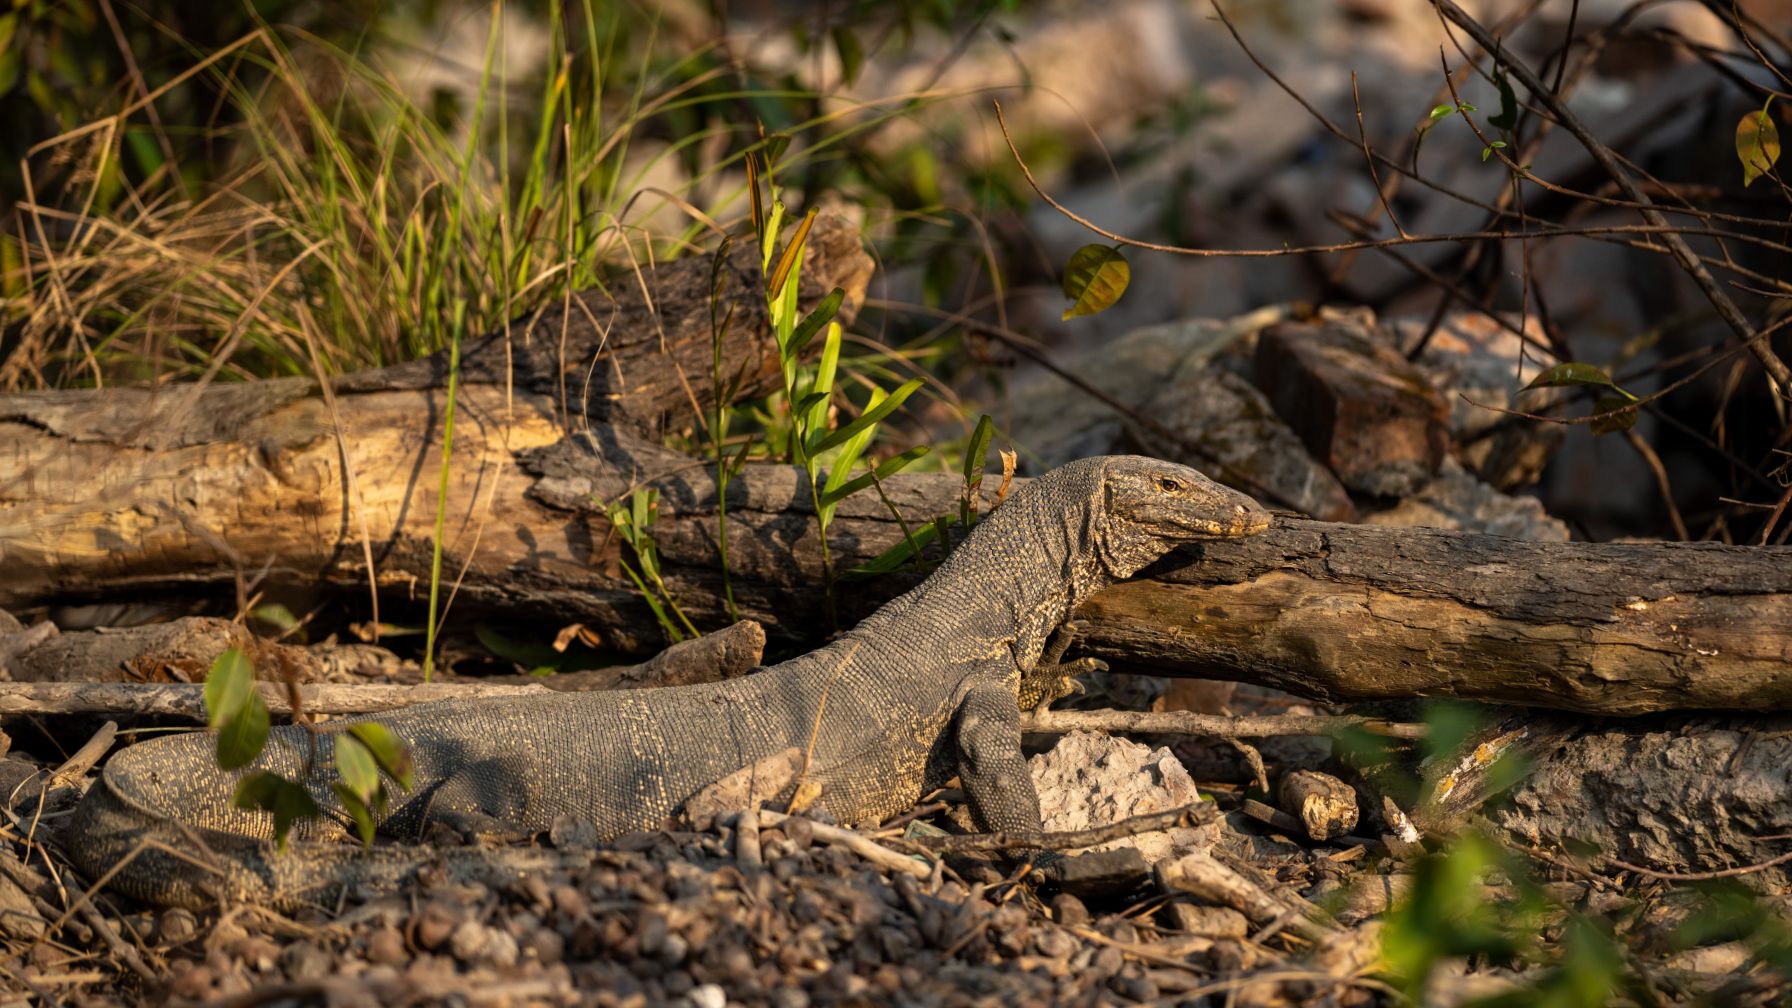 The Sundarbans is also home to more than 50 reptile species, including monitor lizards, like the one pictured, and saltwater crocodiles. The mangrove belt provides an ideal habitat for them. As well as being good for biodiversity, the mangroves are important for coastal protection and water quality. © Tapash Paul/GIZ